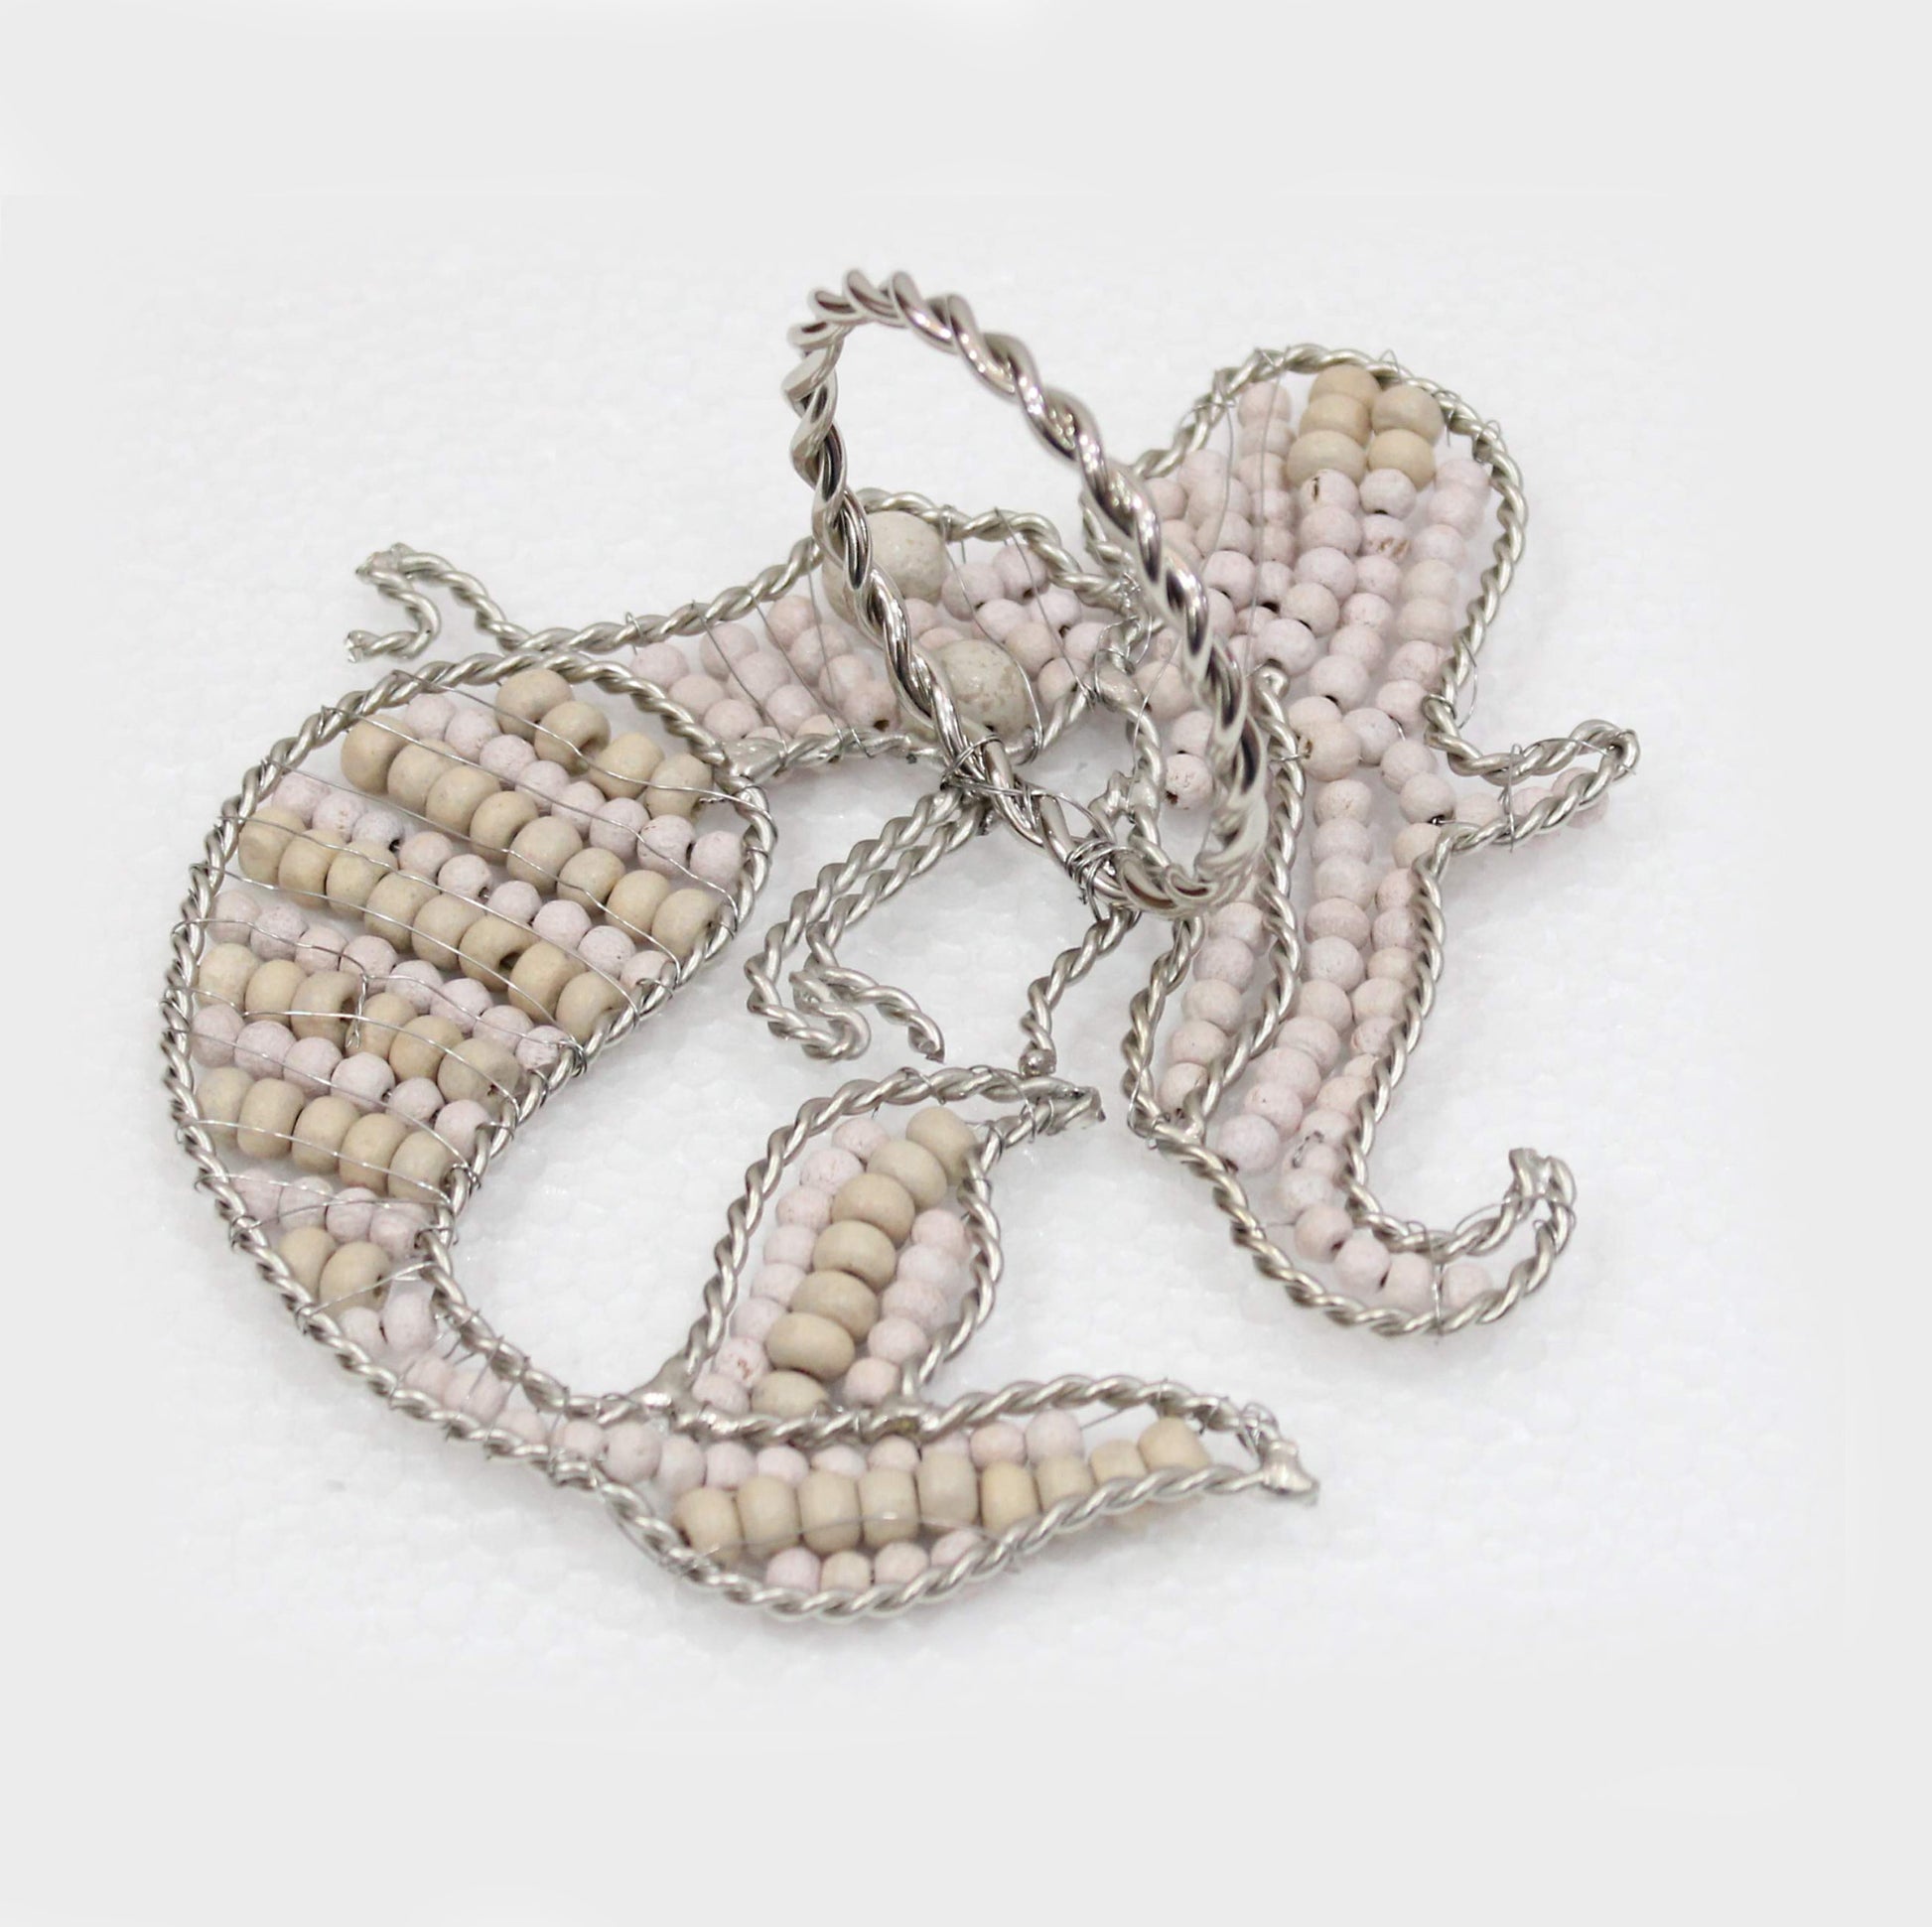 Mermaid shaped napkin ring crafted of natural beads reverse view.